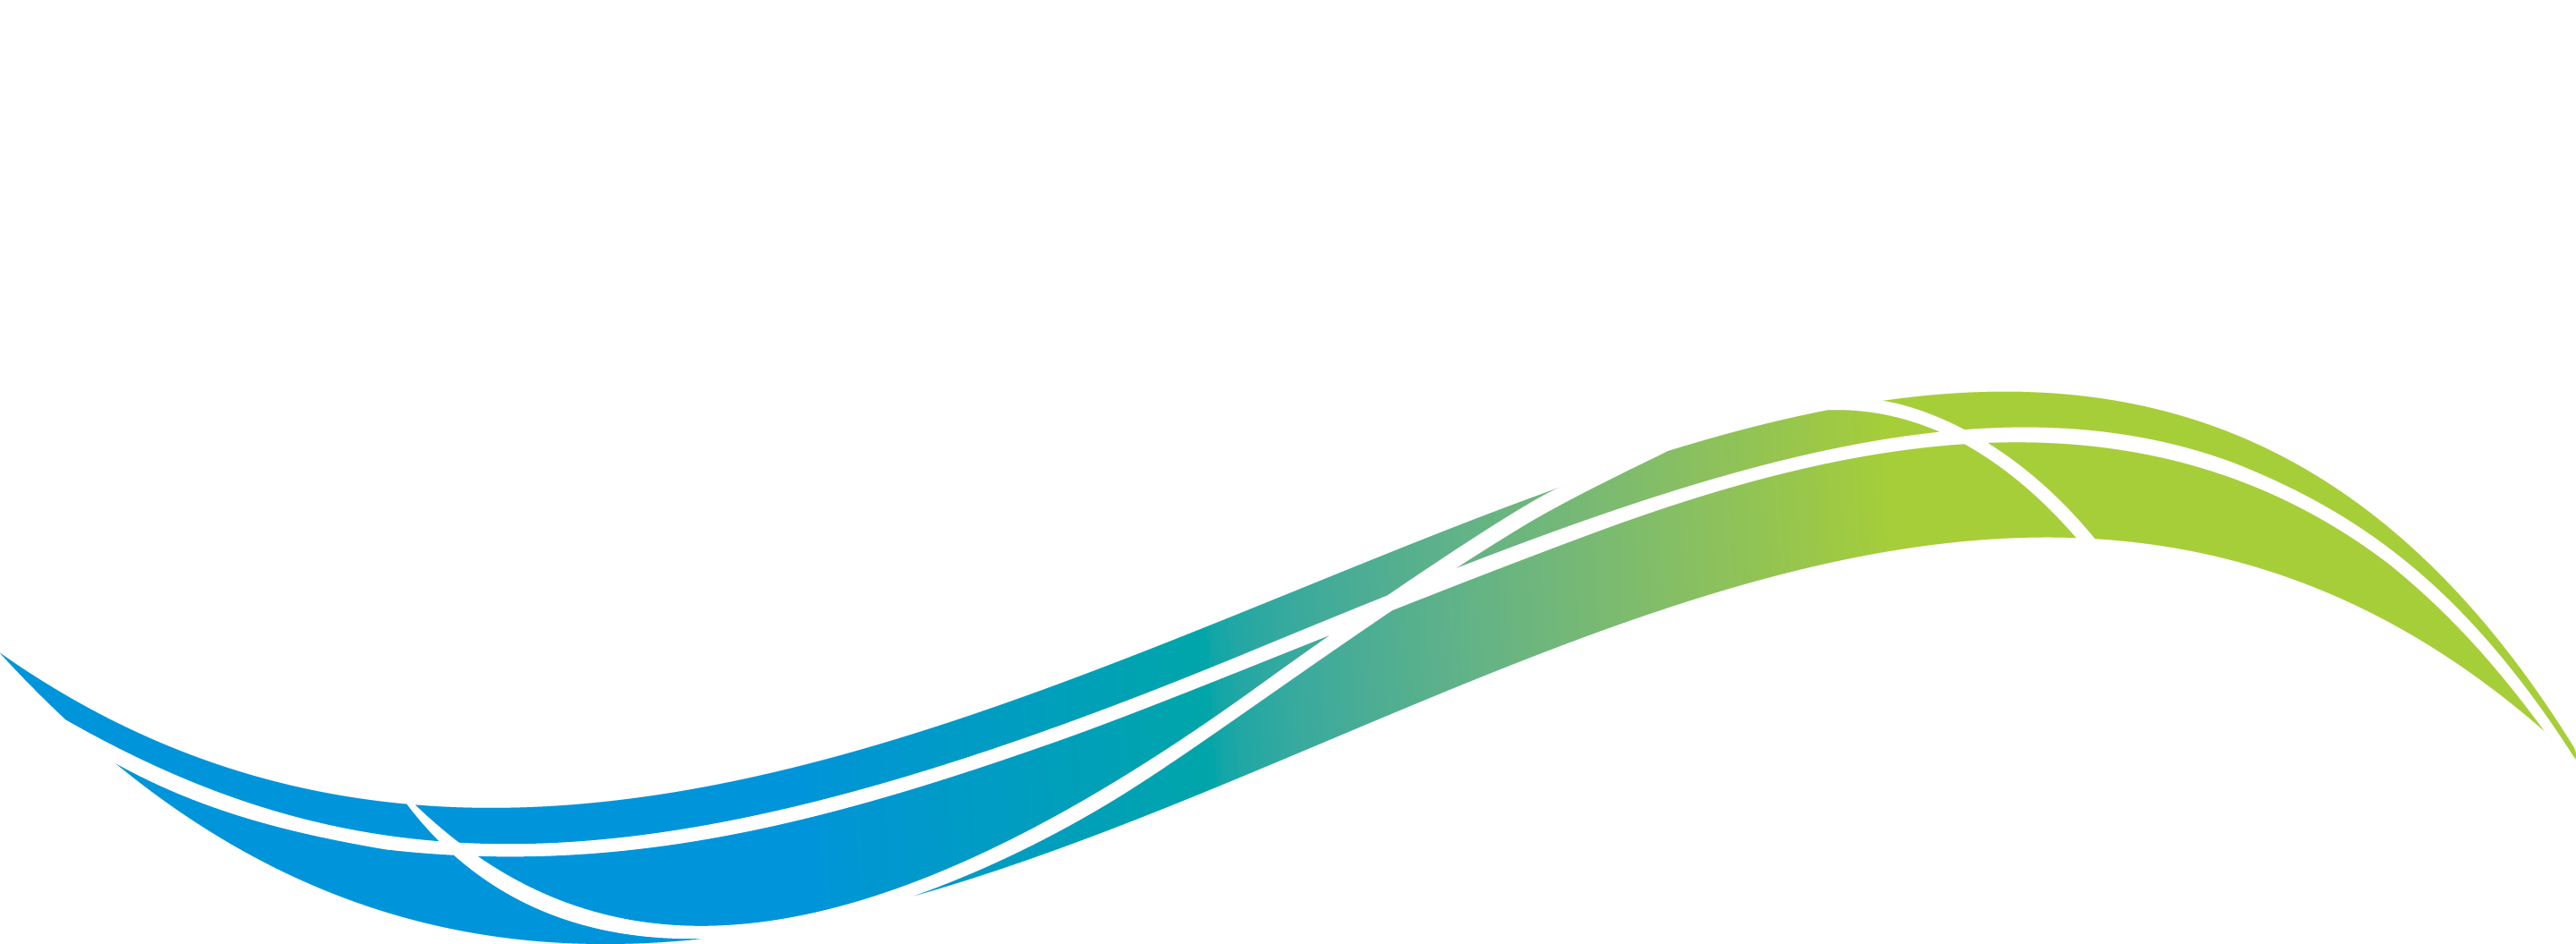 butterfieldpd-logo-white-letters.png